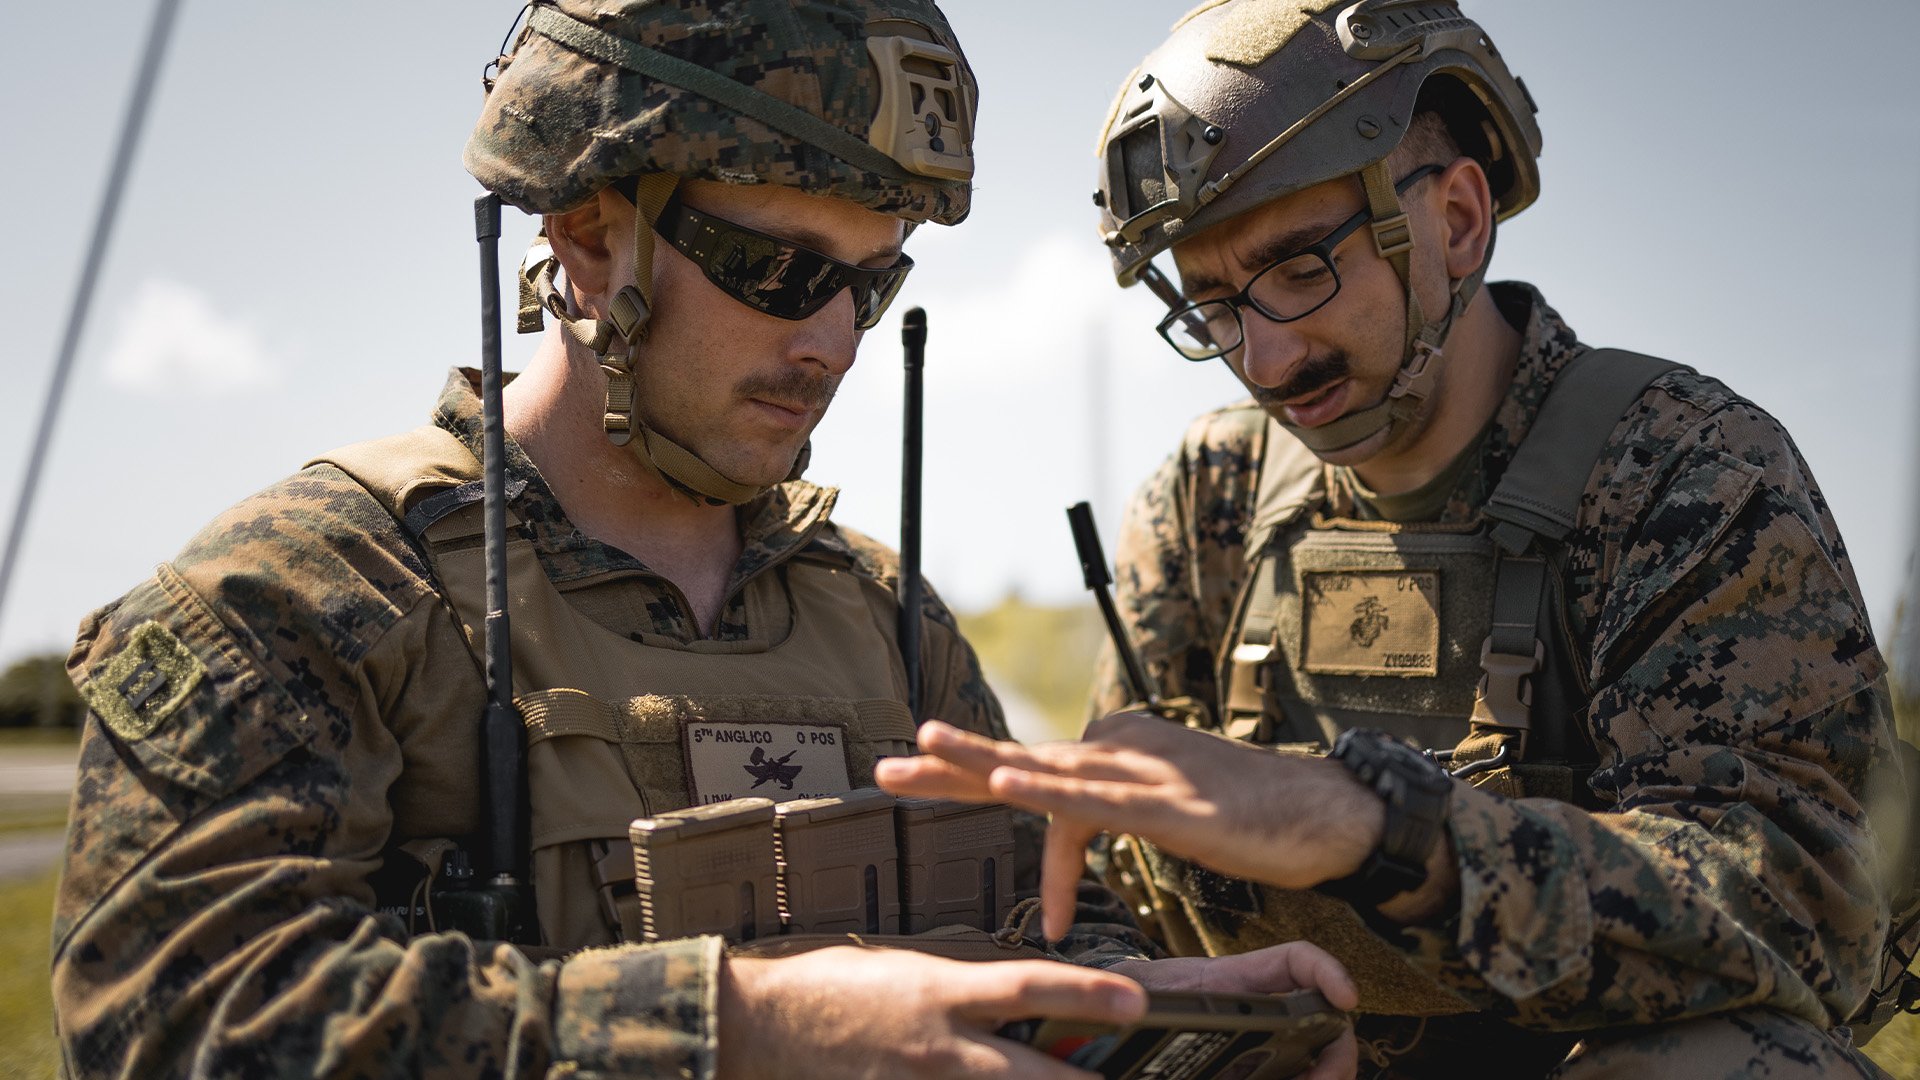 US Marine Corps Capt. Christian Link, a forward air controller/air officer, and Sgt. Zachary Verrier, a transmissions systems operator assigned to 5th Air Naval Gunfire Liaison Company, III Marine Expeditionary Force Information Group, use an Android Tactical Assault Kit to coordinate targeting processes during exercise Katana Strike on Kumejima, Okinawa, Japan, Oct. 26, 2022. US Marine Corps photo by Staff Sgt. Manuel Serrano.